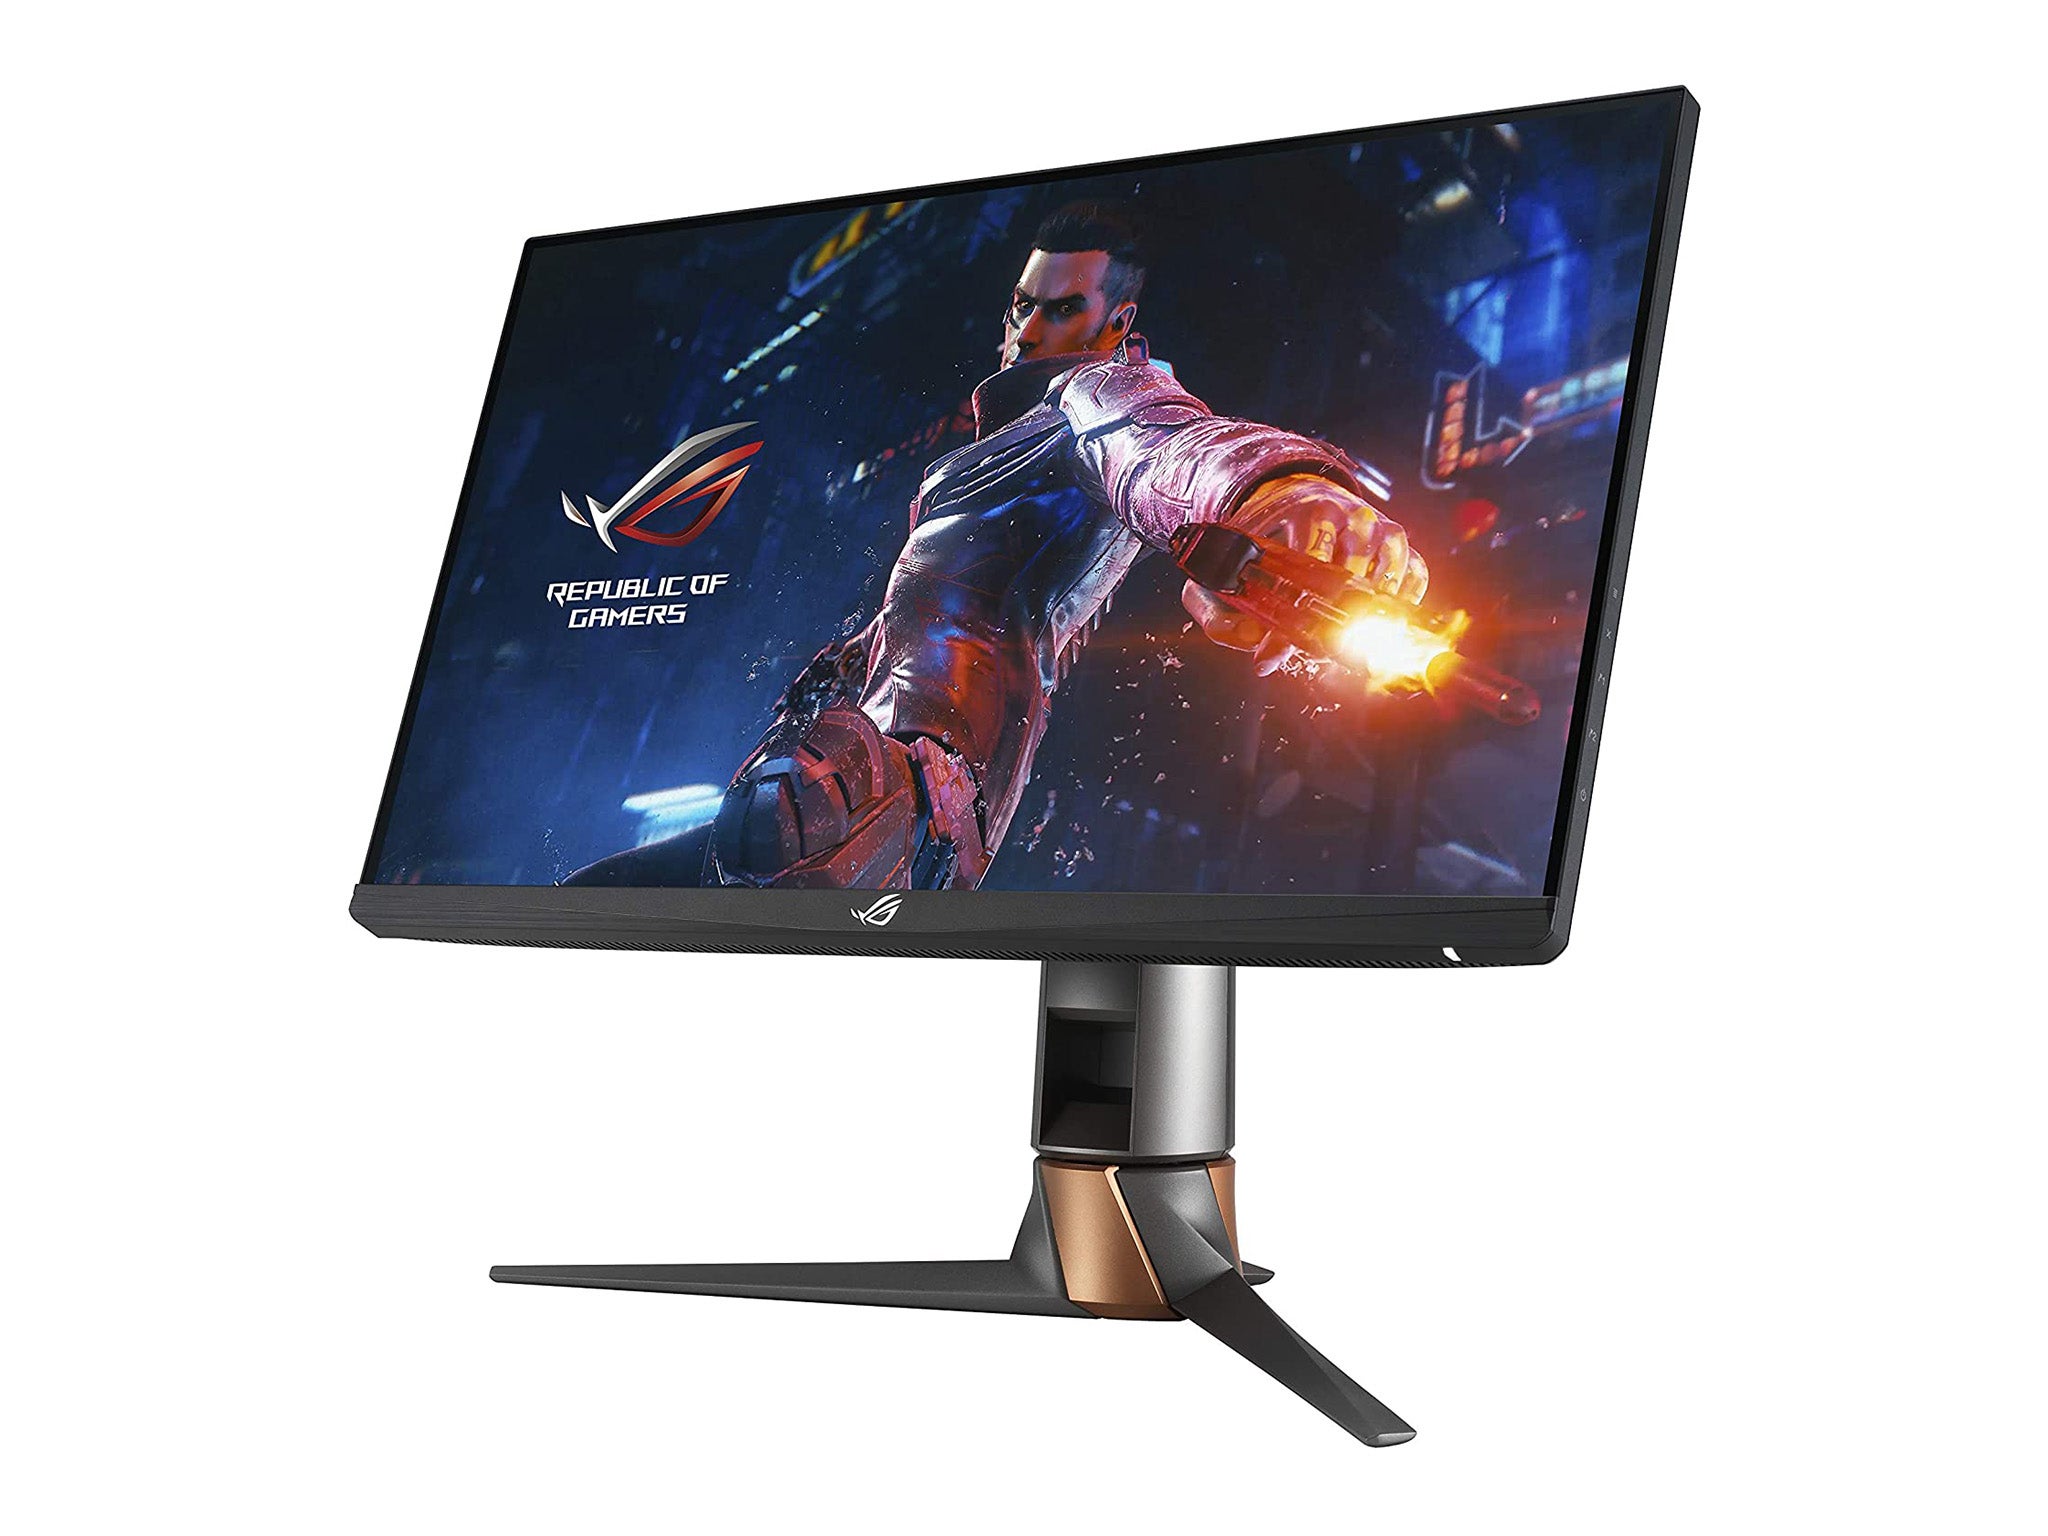 The ROG Swift 500Hz shatters boundaries with its ultra-fast panel